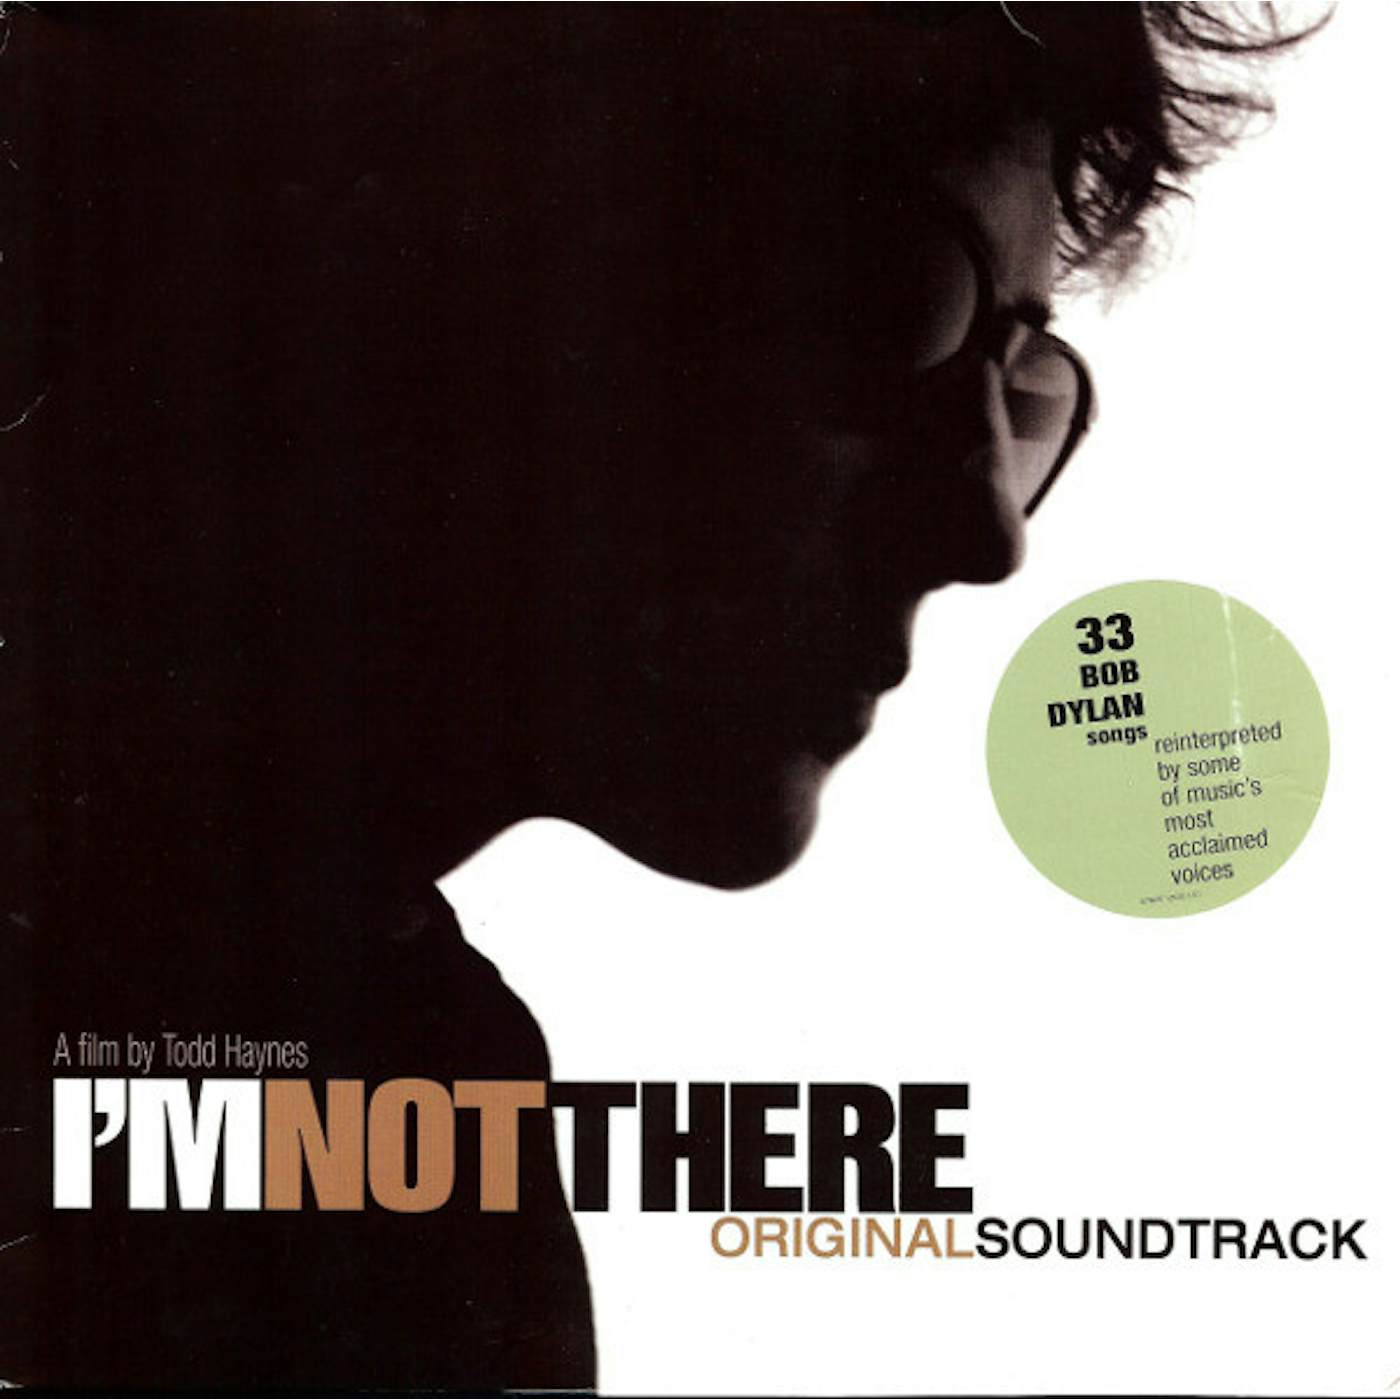 I'M NOT THERE / O.S.T. I'M NOT THERE / Original Soundtrack CD